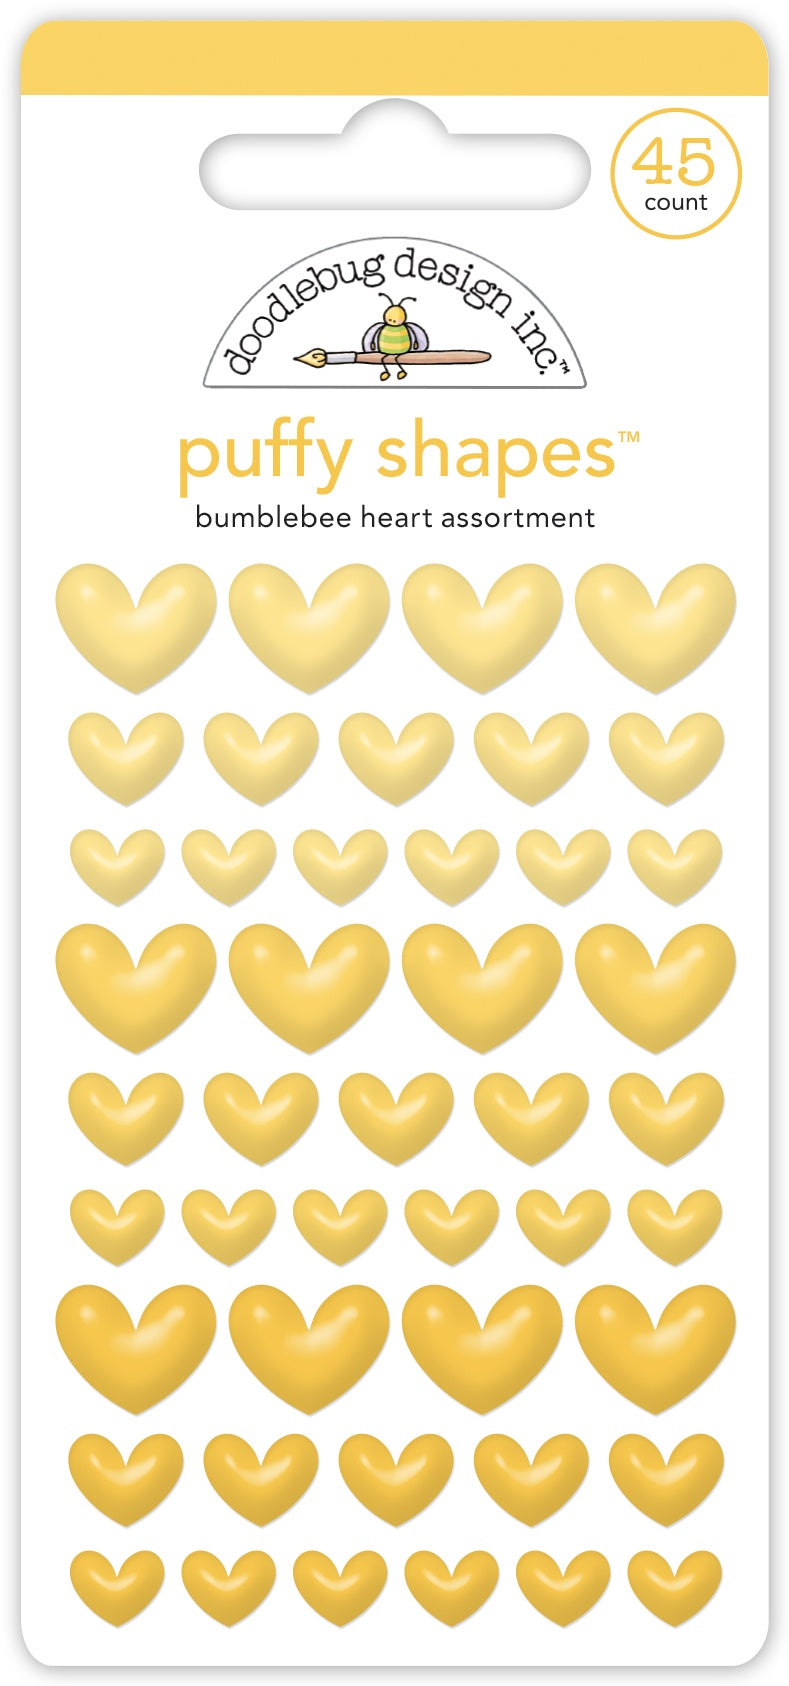 Puffy Shapes Bumblebee Hearts